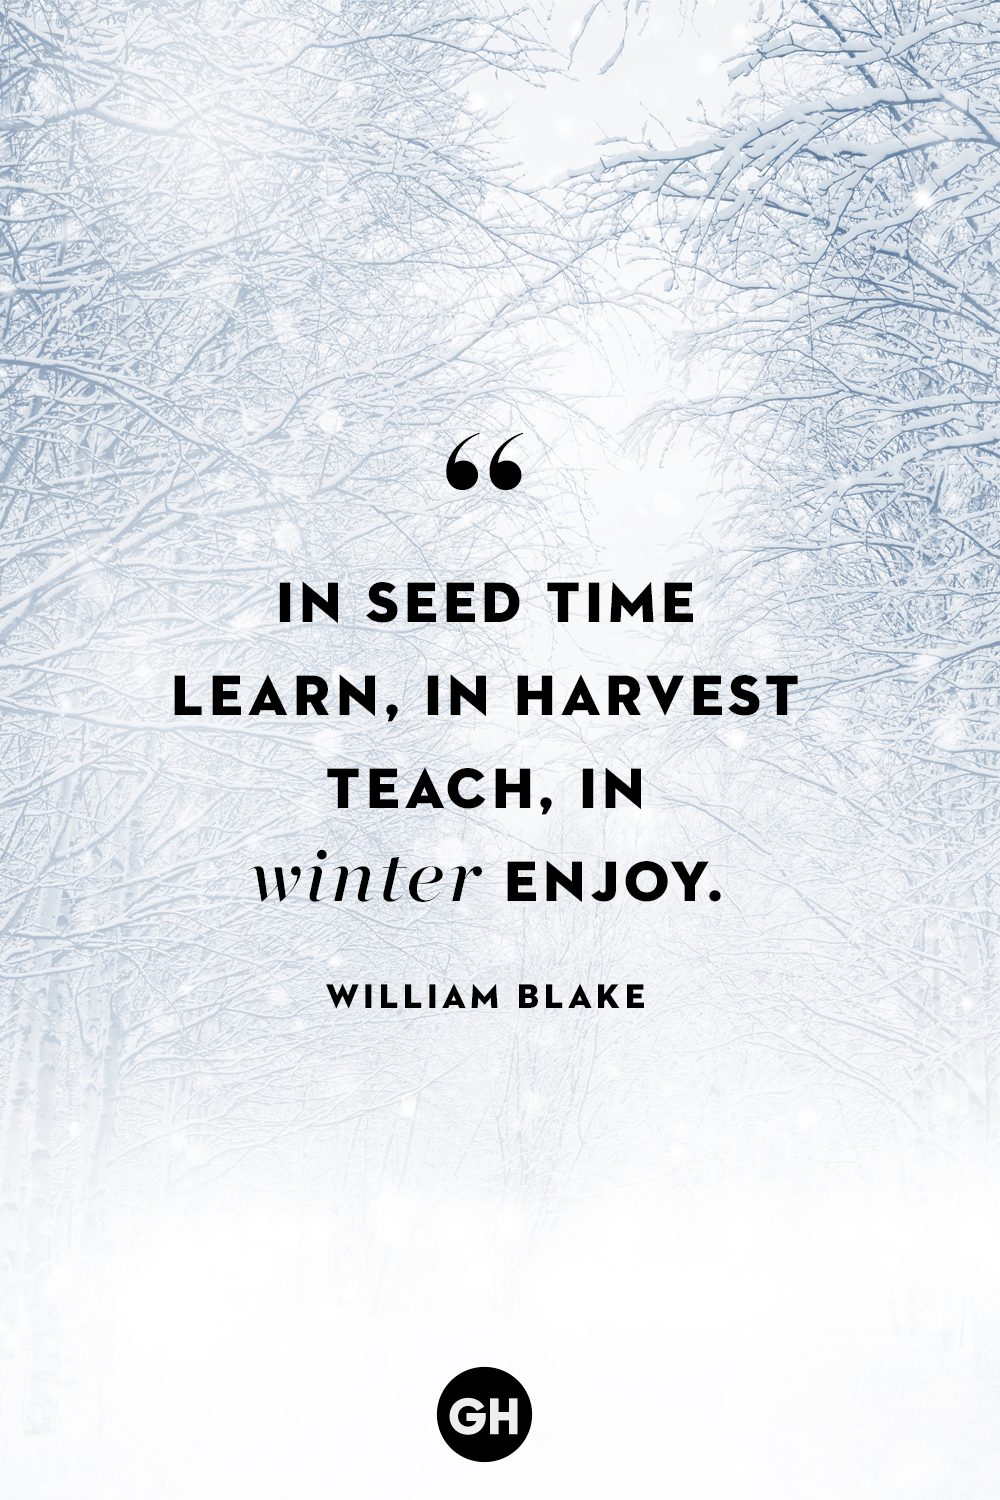 42 Best Winter Quotes - Short and Cute Sayings About Cold Weather